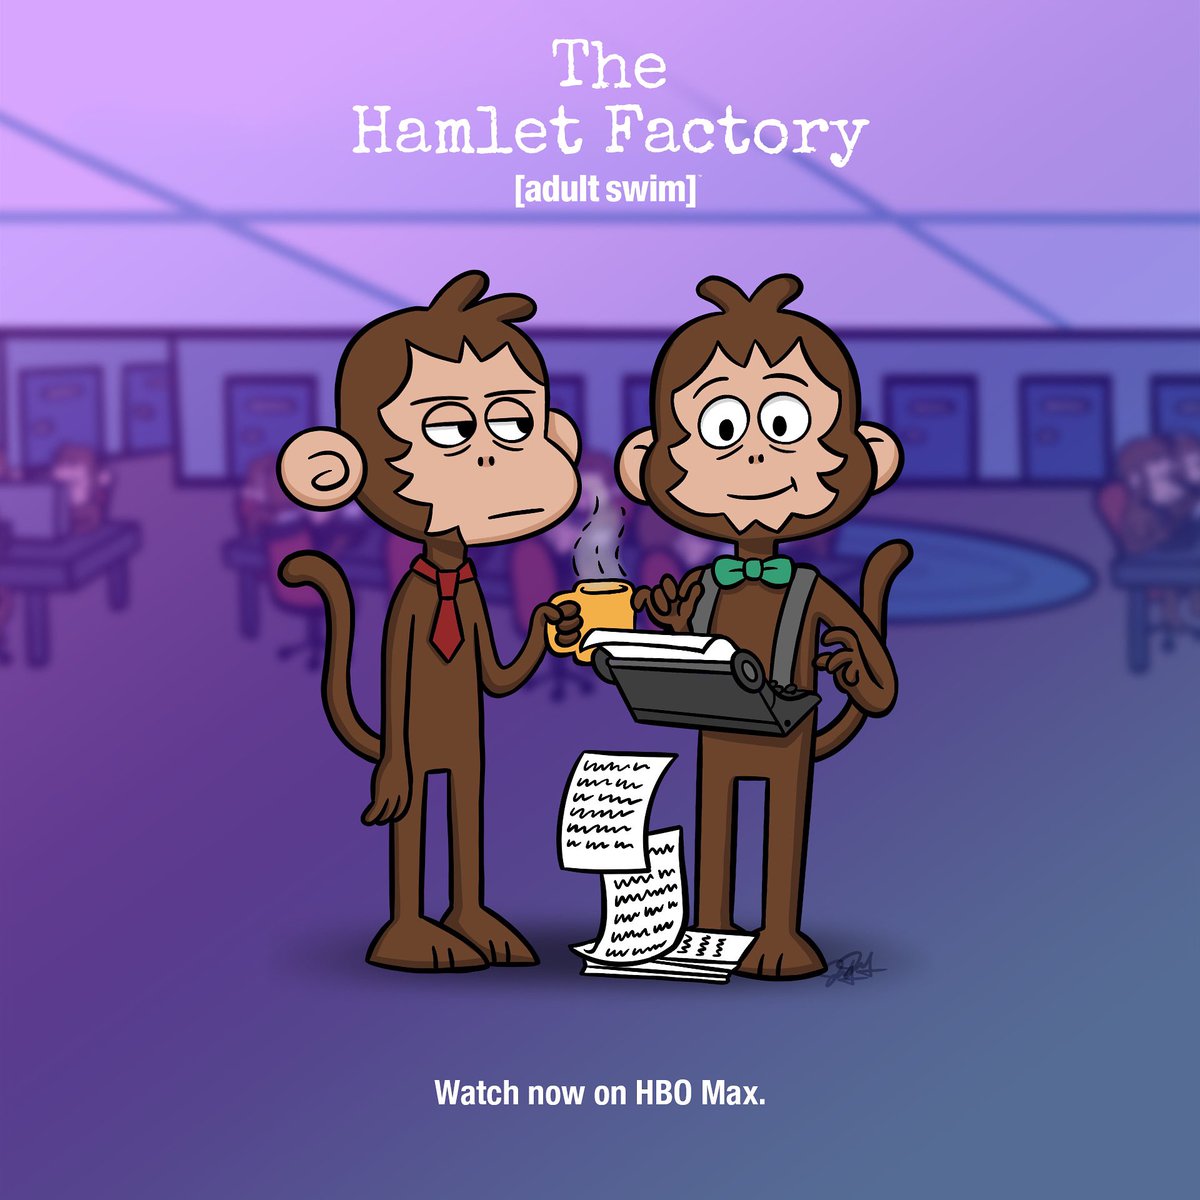 1 - open HBOMax
2 - search SMALLS
3 - hit play on episode 5, 6, 7 on their latest season 
4 - enjoy some monkey madness!  
#thehamletfactory #adultswimsmalls